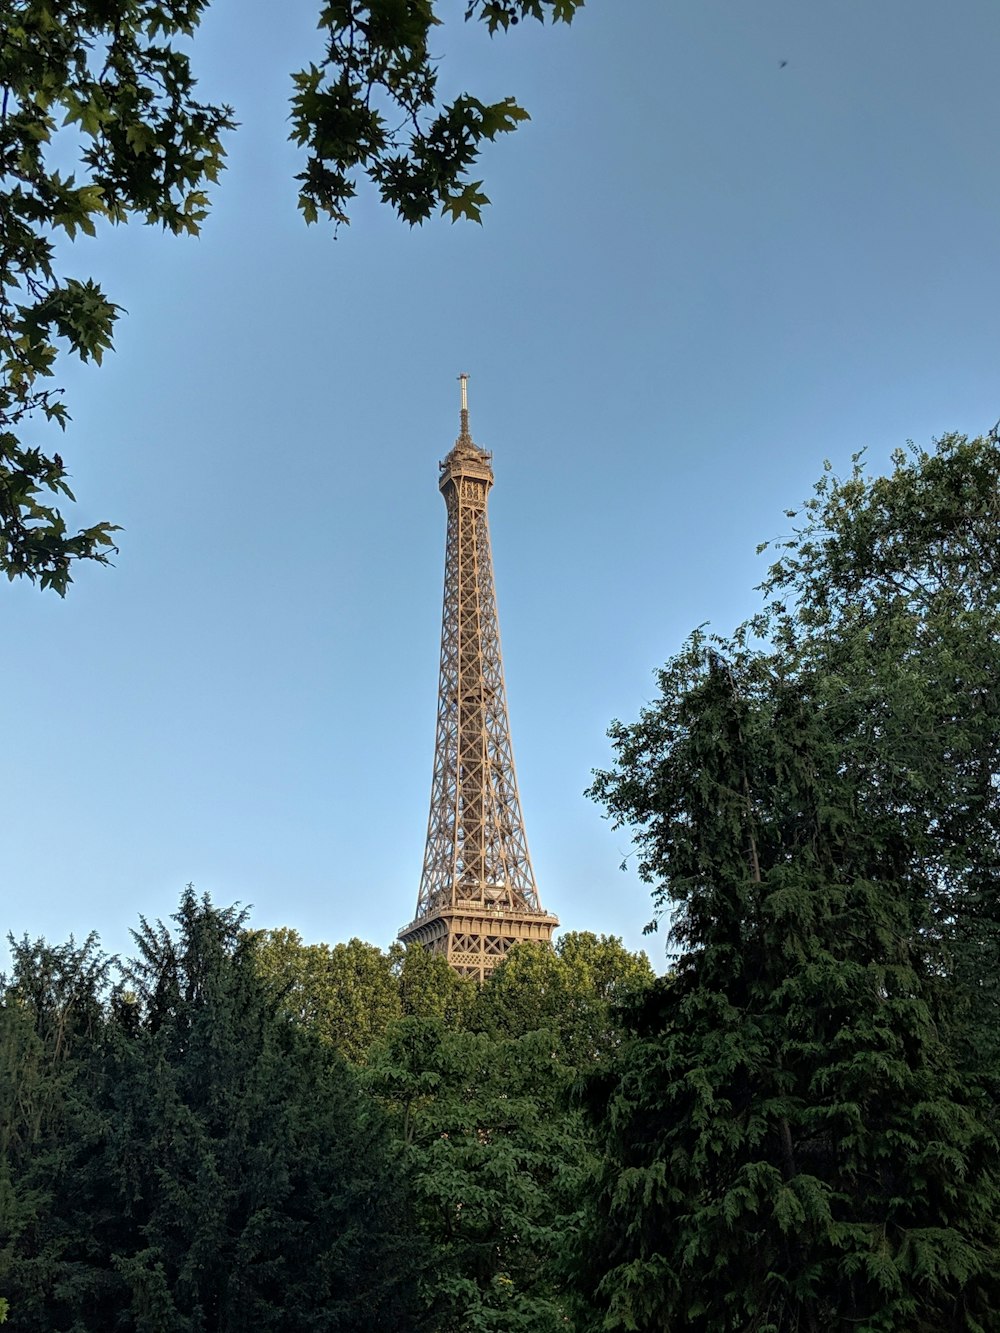 Eiffel Tower in Paris France during daytime